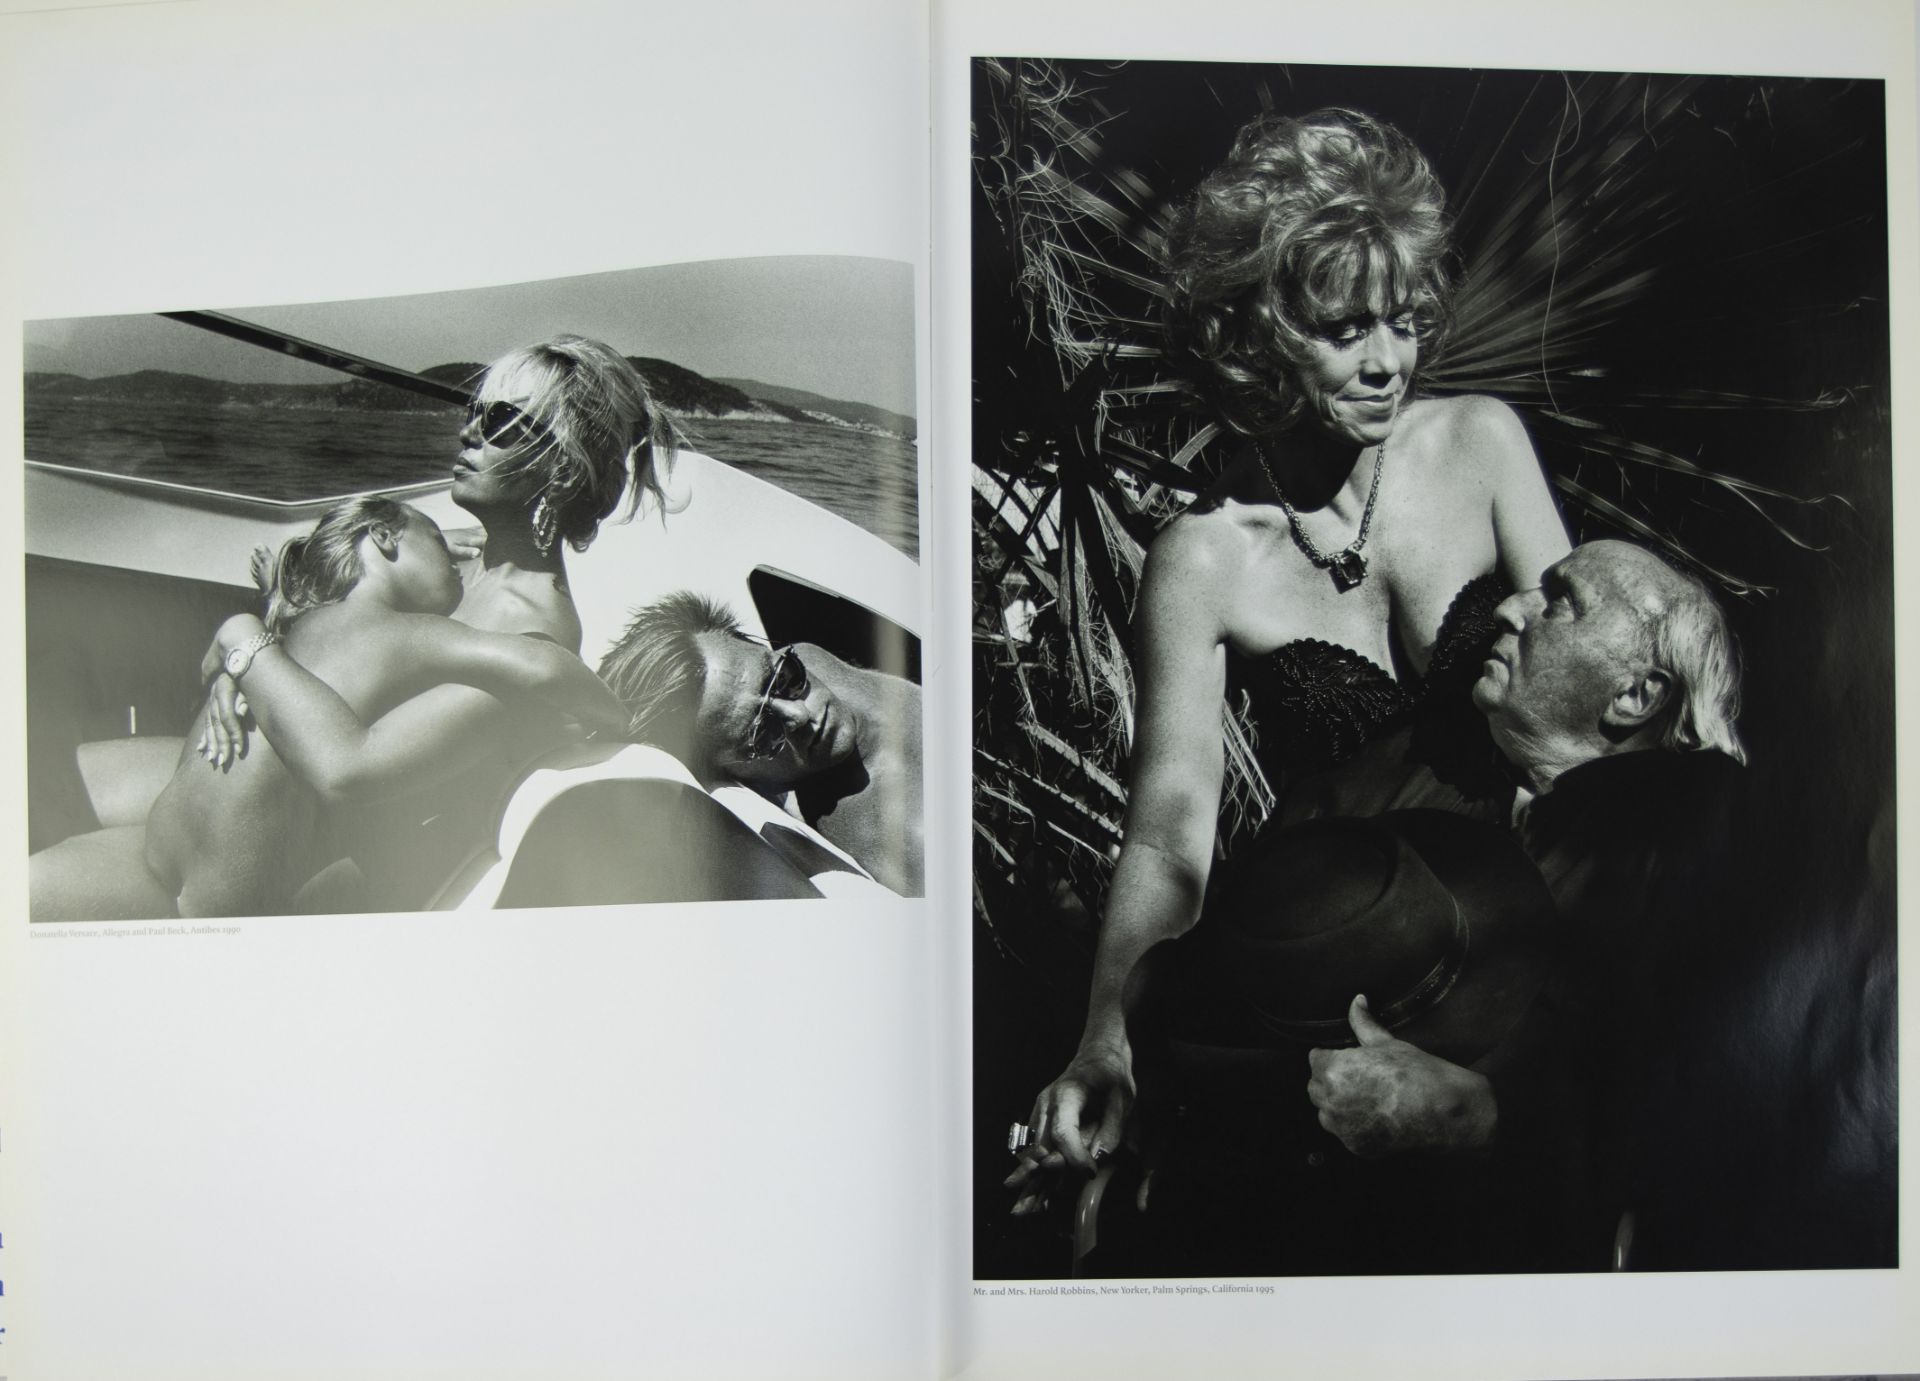 Large pancarte for book by Helmut Newton, publisher Tashen with various black and white photographs - Bild 4 aus 5